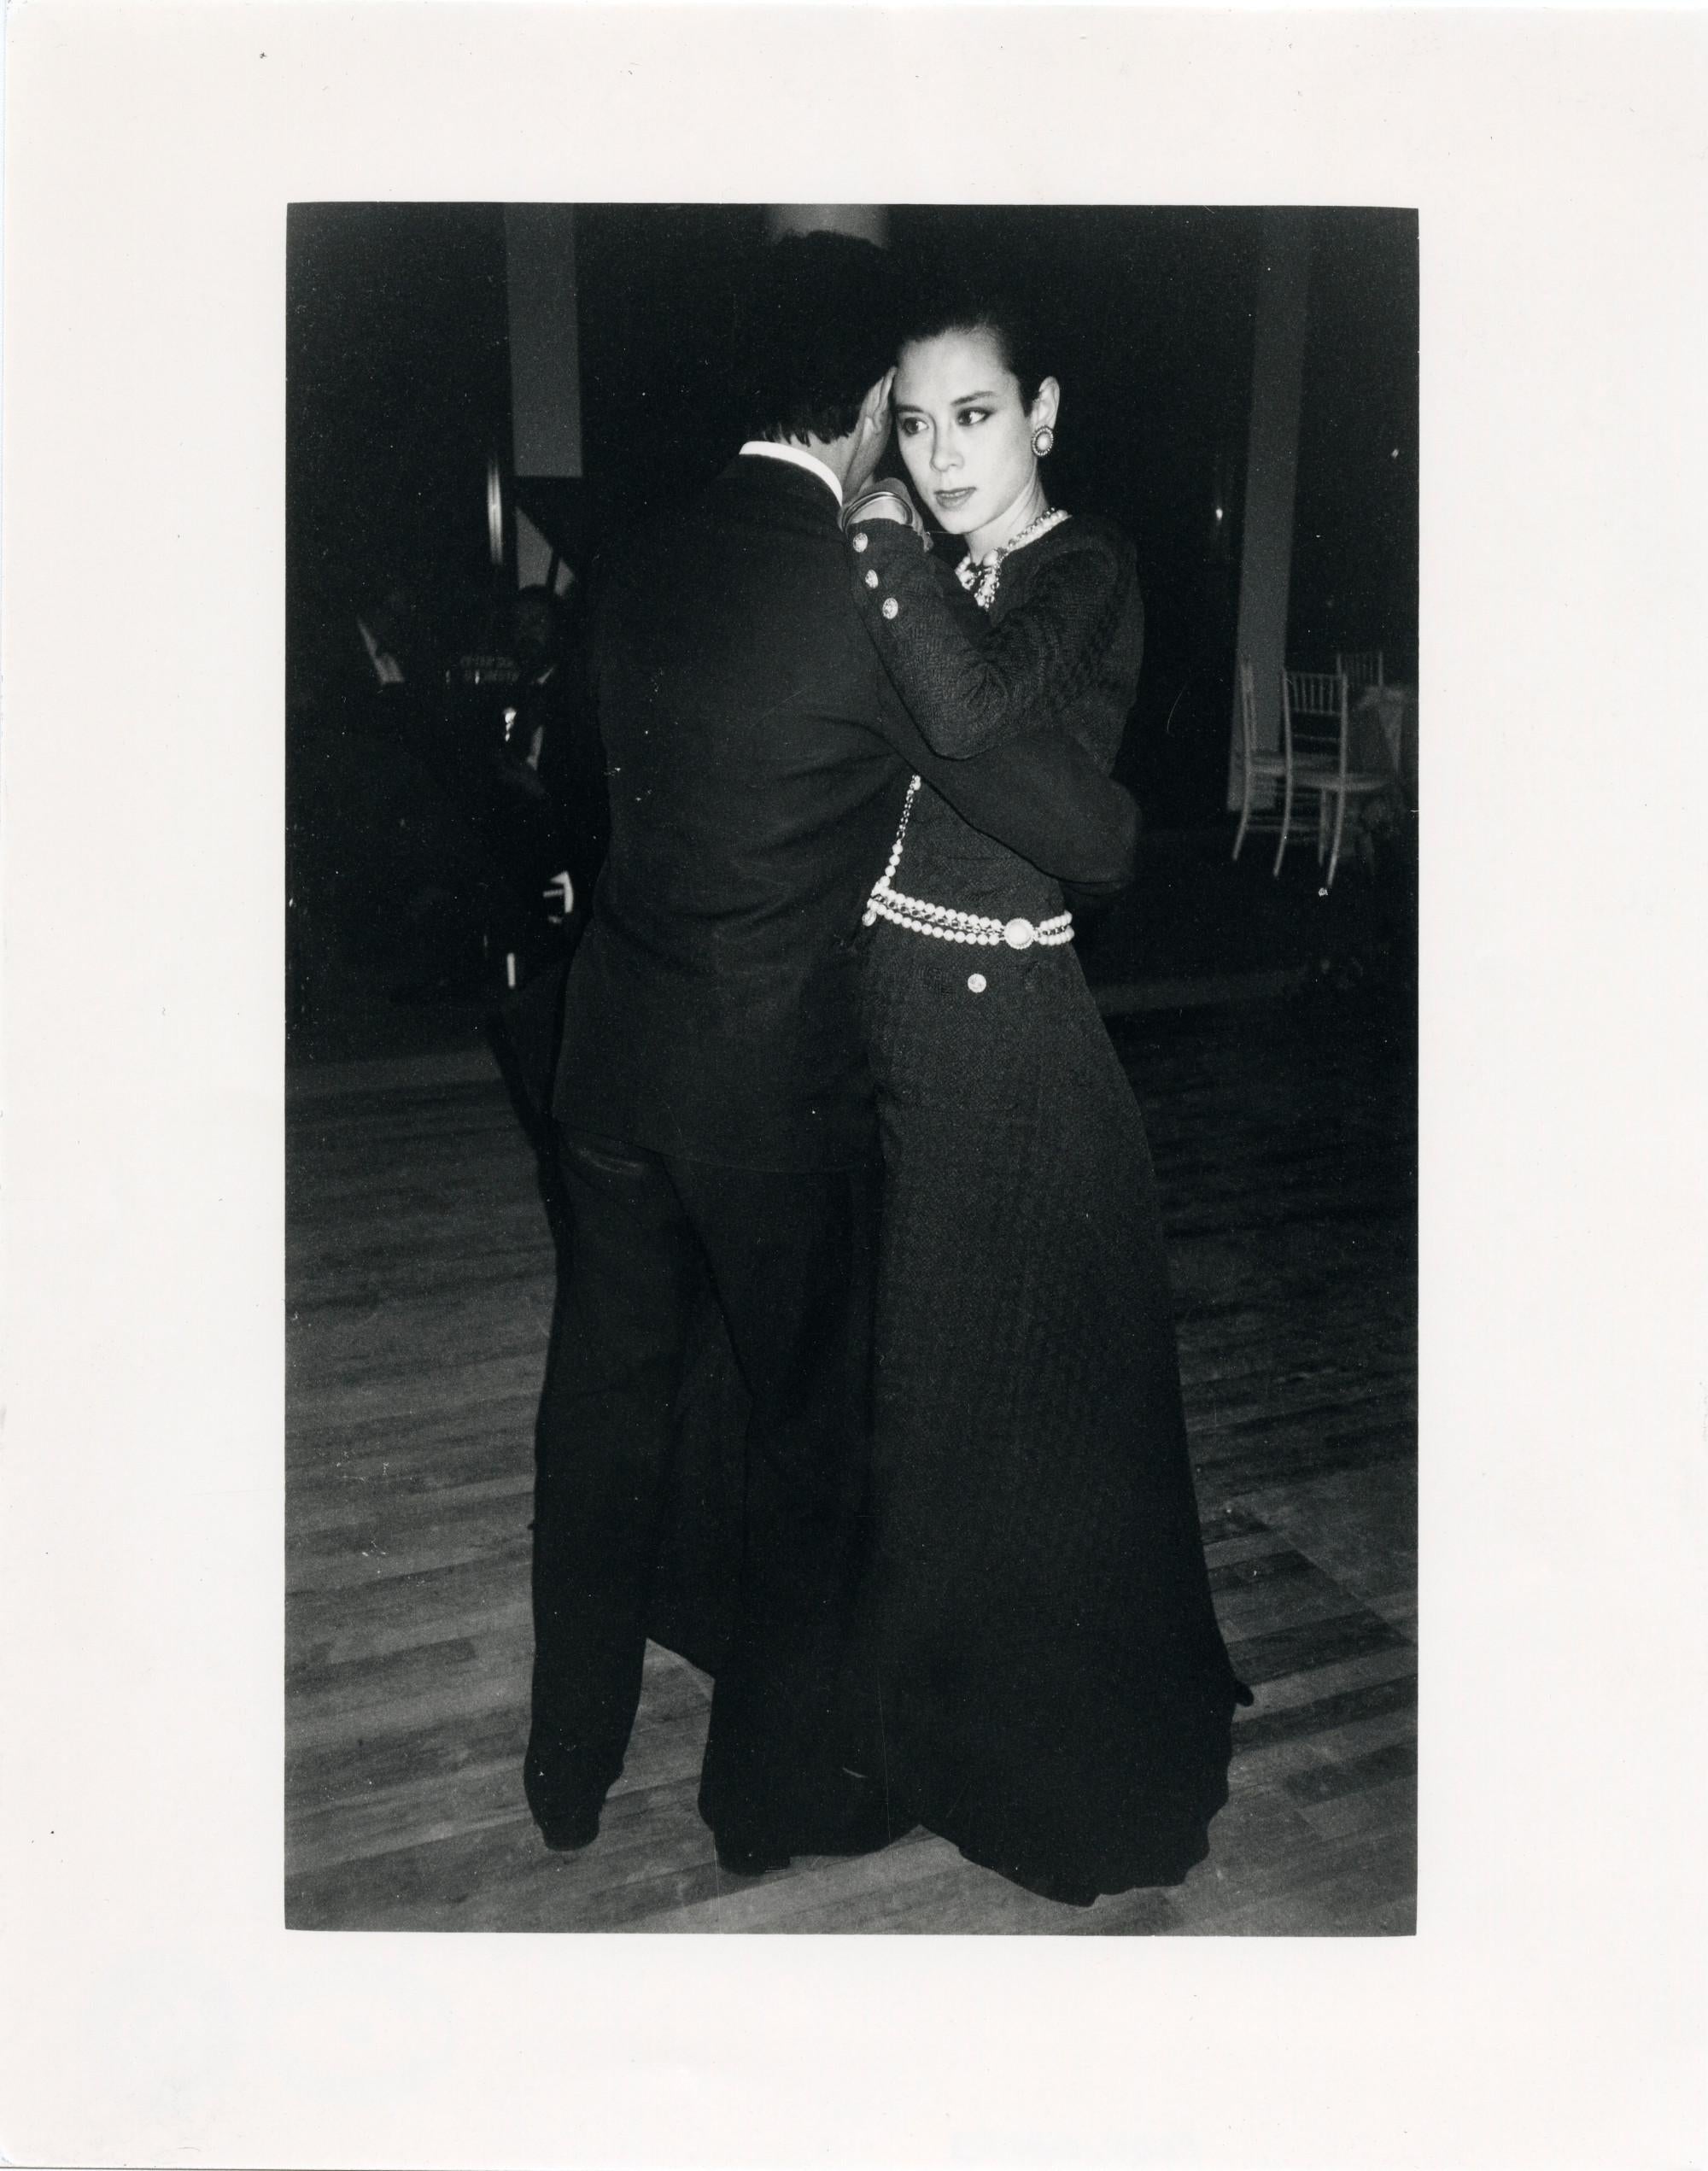 Andy Warhol Black and White Photograph - Tina Chow Dancing at Karl Lagerfeld dinner at MOMA